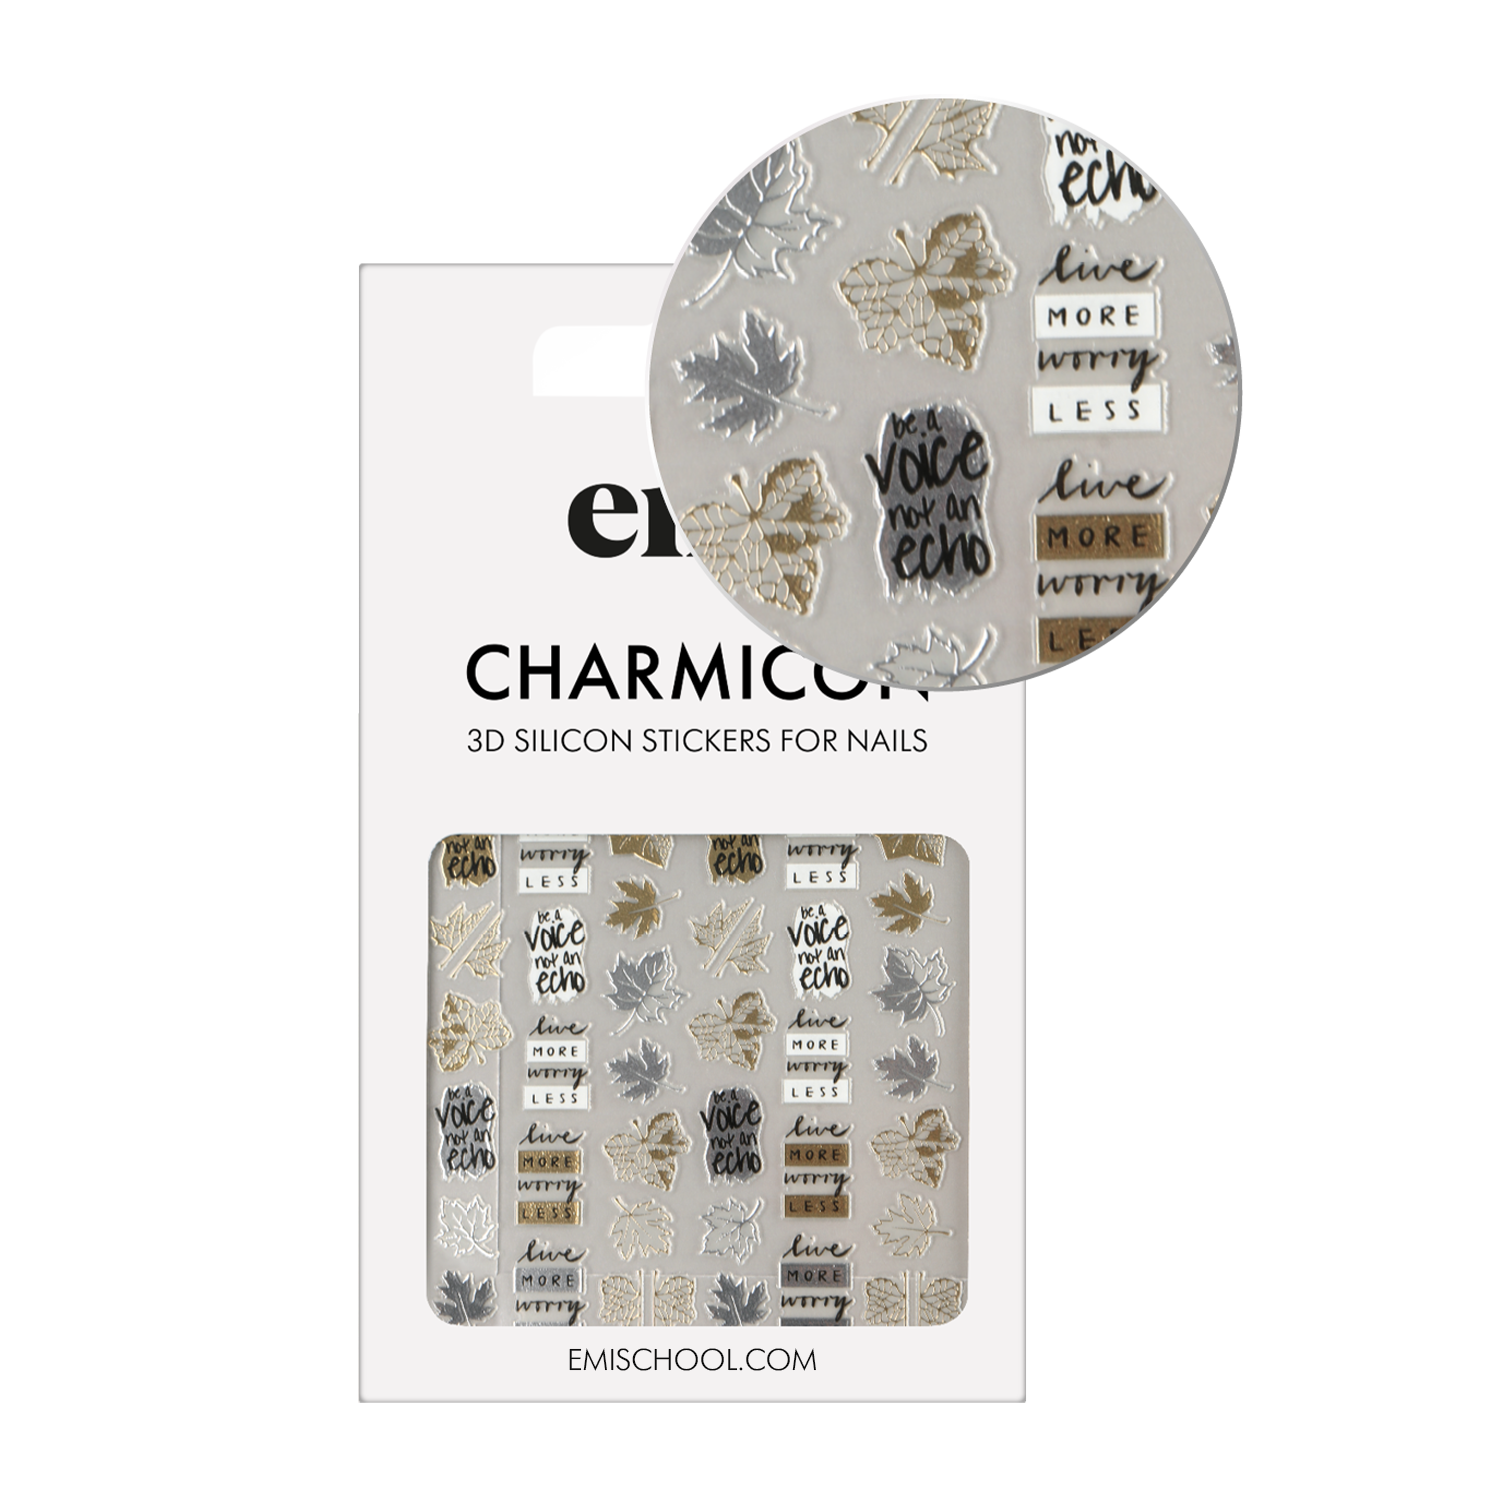 Charmicon 3D Silicone Stickers #243 Maple leaves